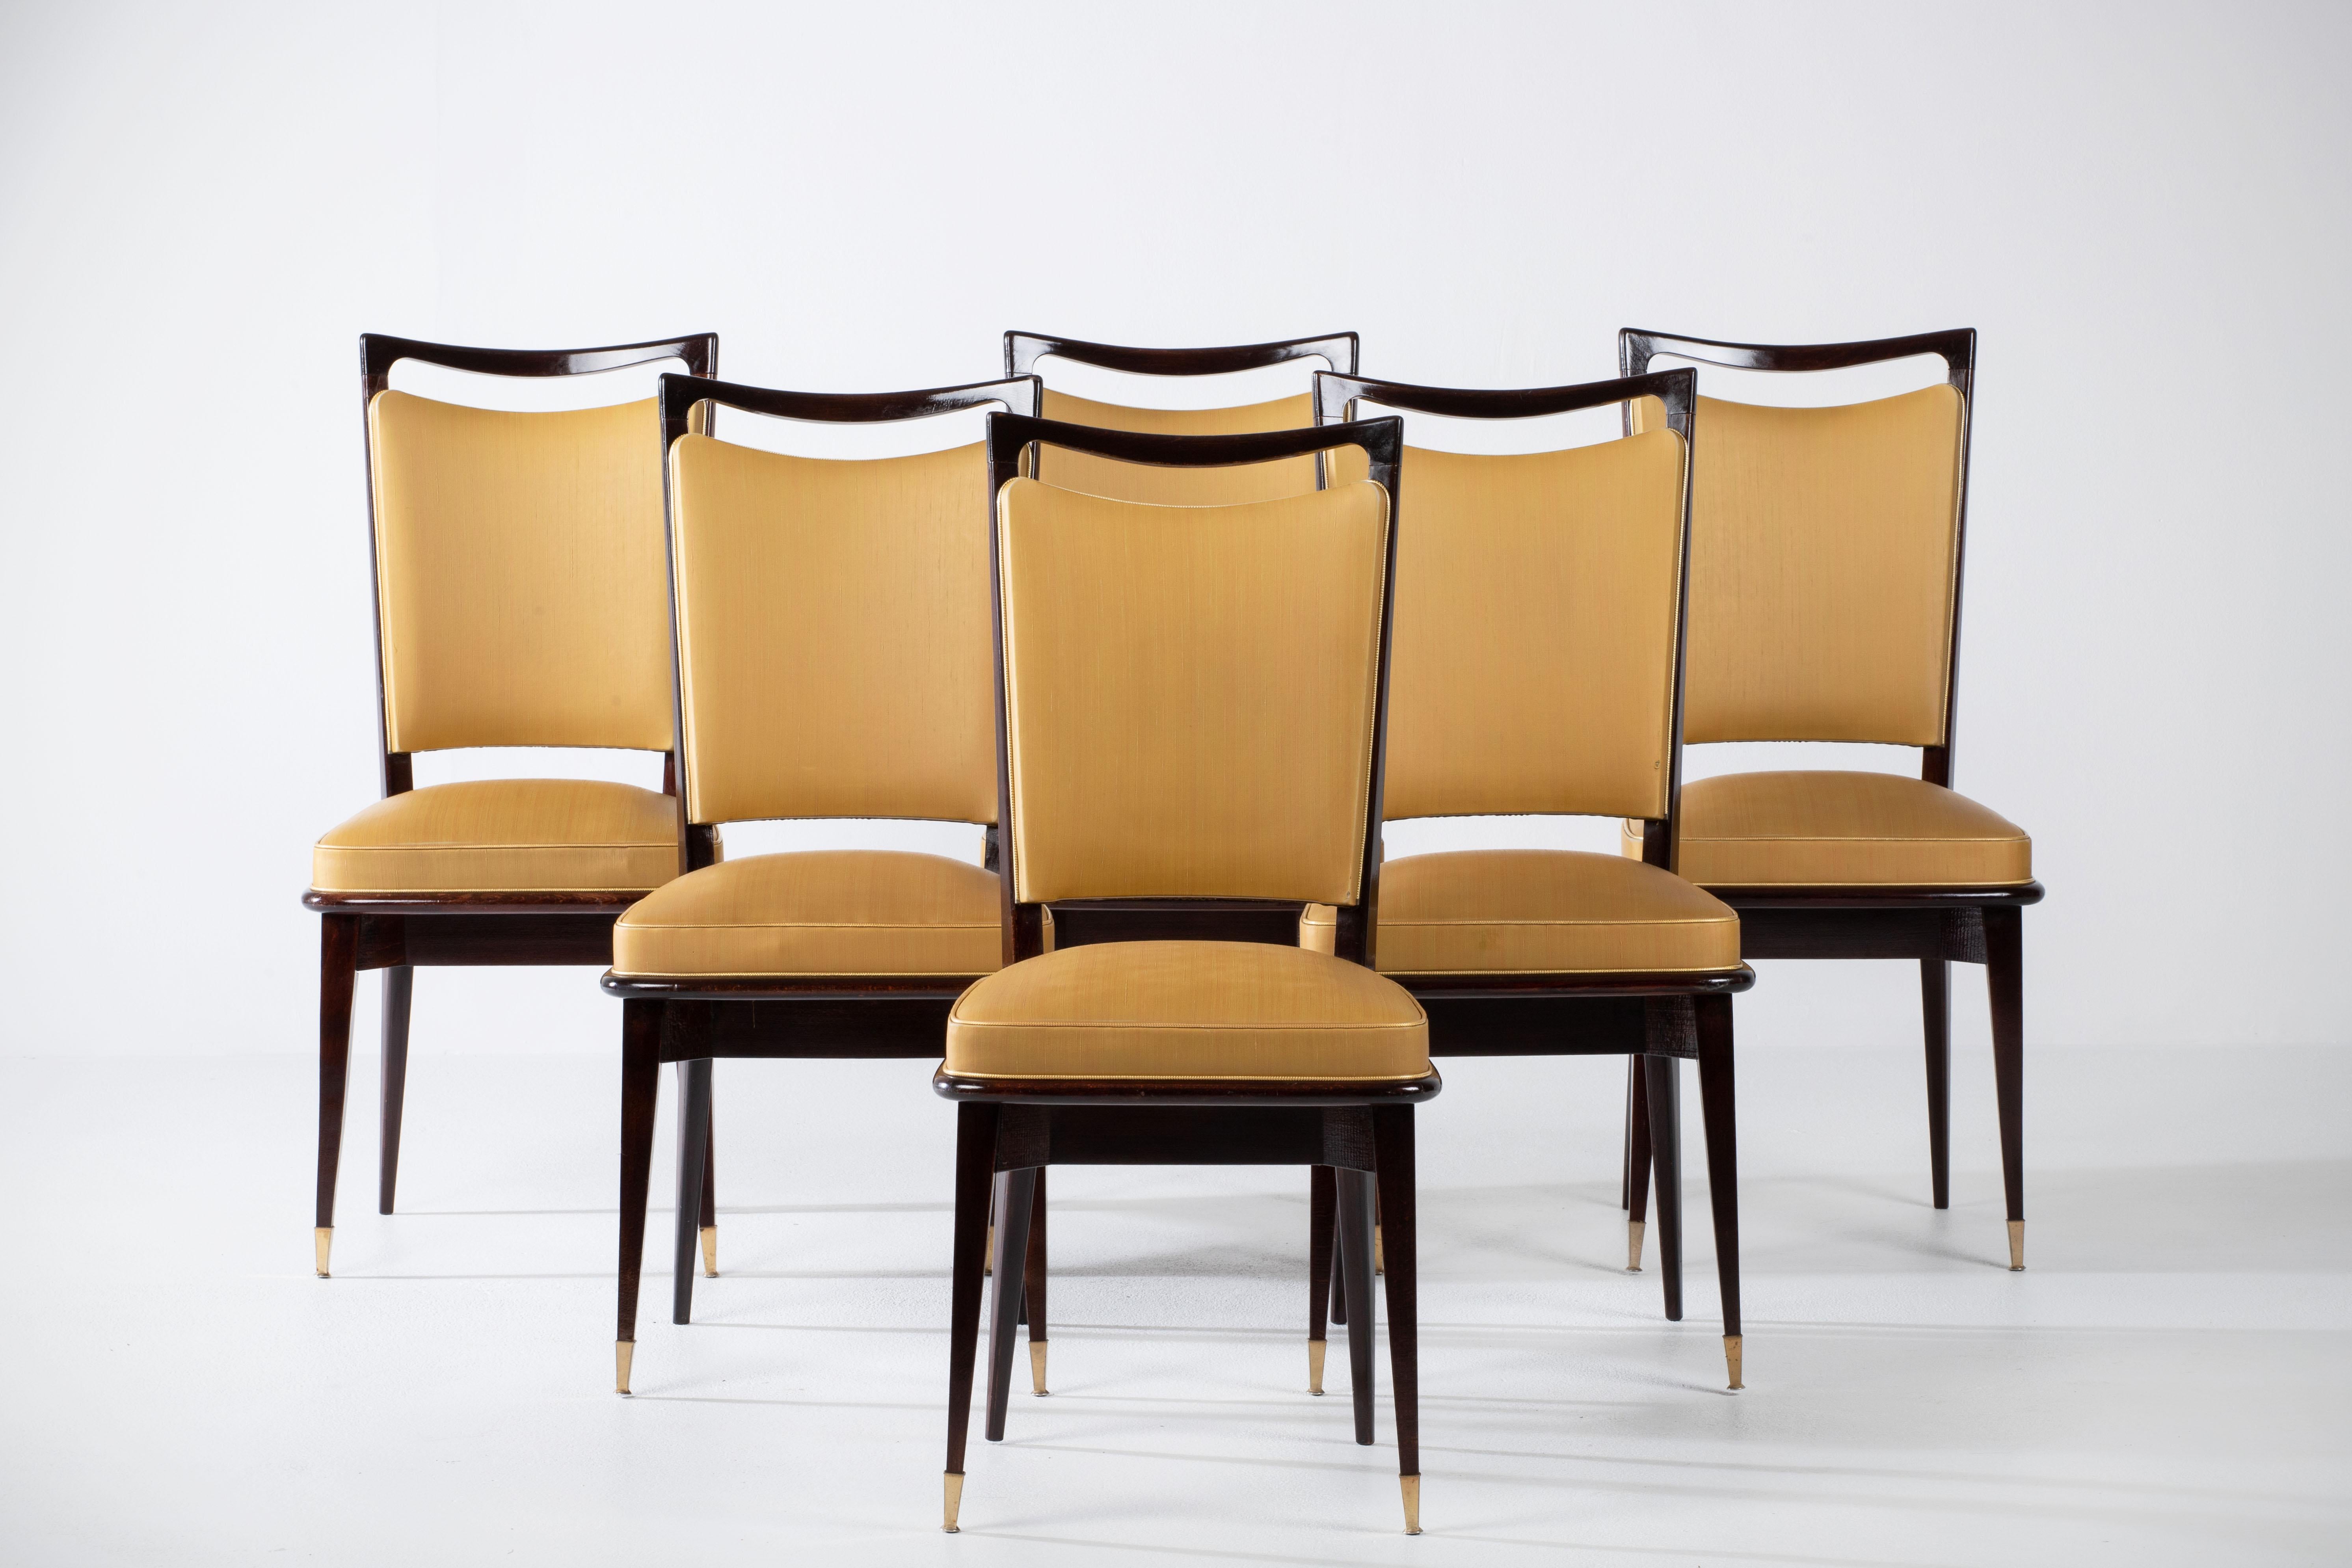 Set of six upholstered high back chairs covered in yellow vynil, exhibiting traditional French design elements in a deep oak finish.

In the style of René Prou, Albert-Lucien Guenot, Pomone, André Arbus, Baptistin Spade, Charles Dudouyt, Herman